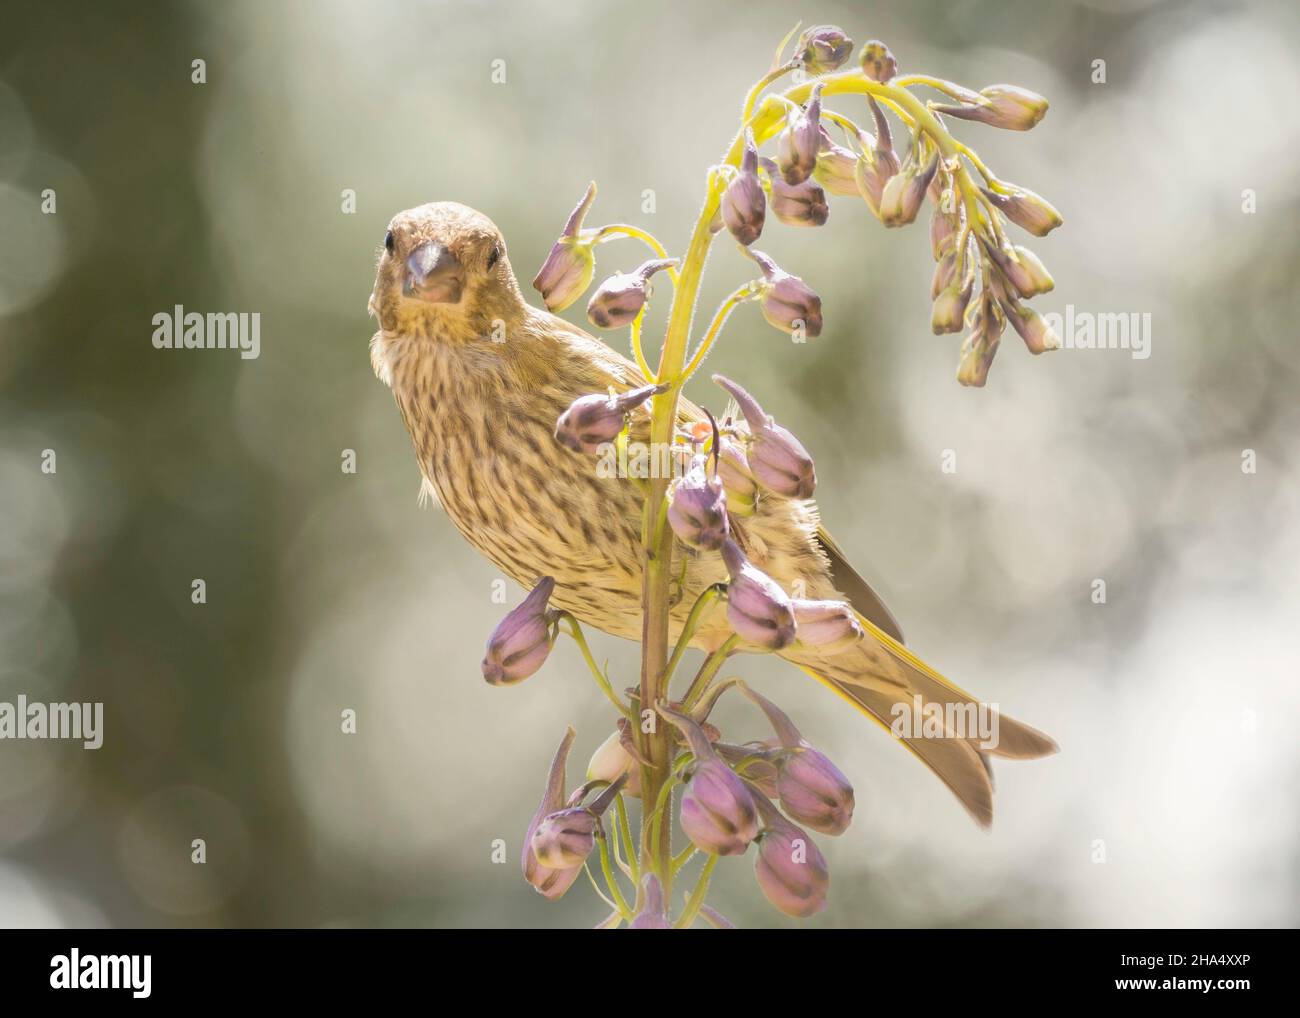 close up of a of green finch on flowers looking at the viewer Stock Photo